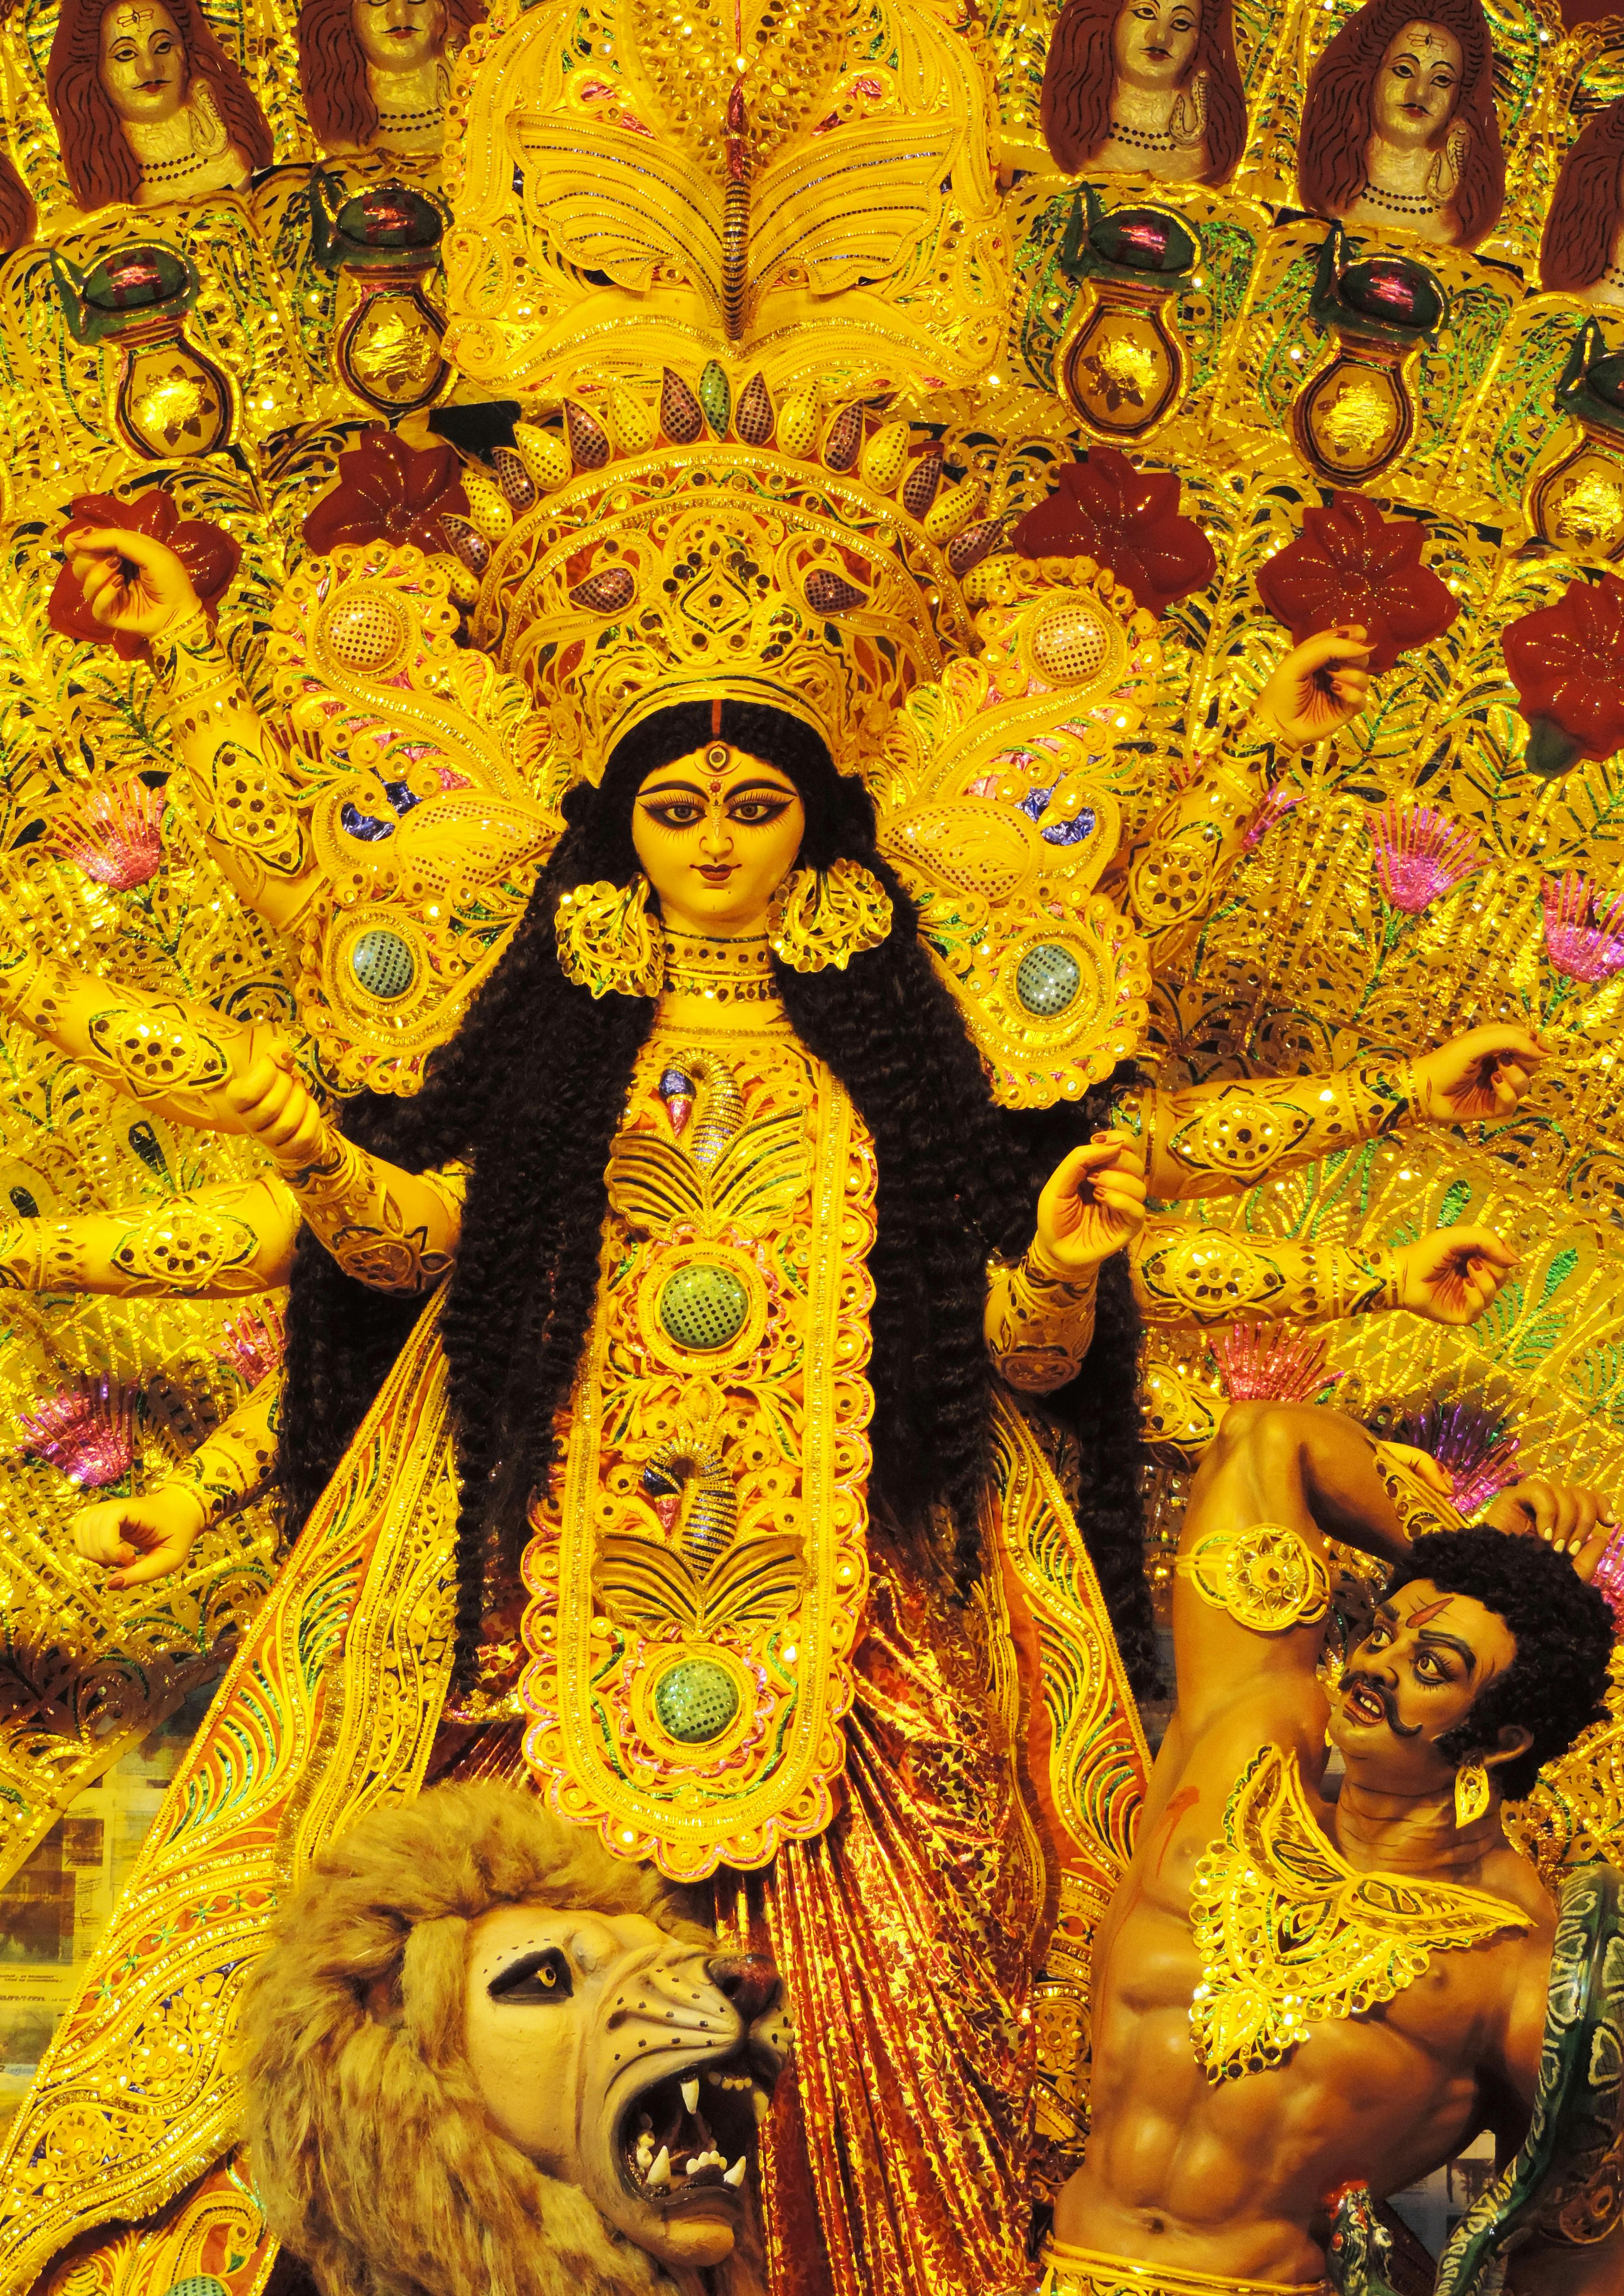 1000 Durga Puja Pictures  Download Free Images on Unsplash